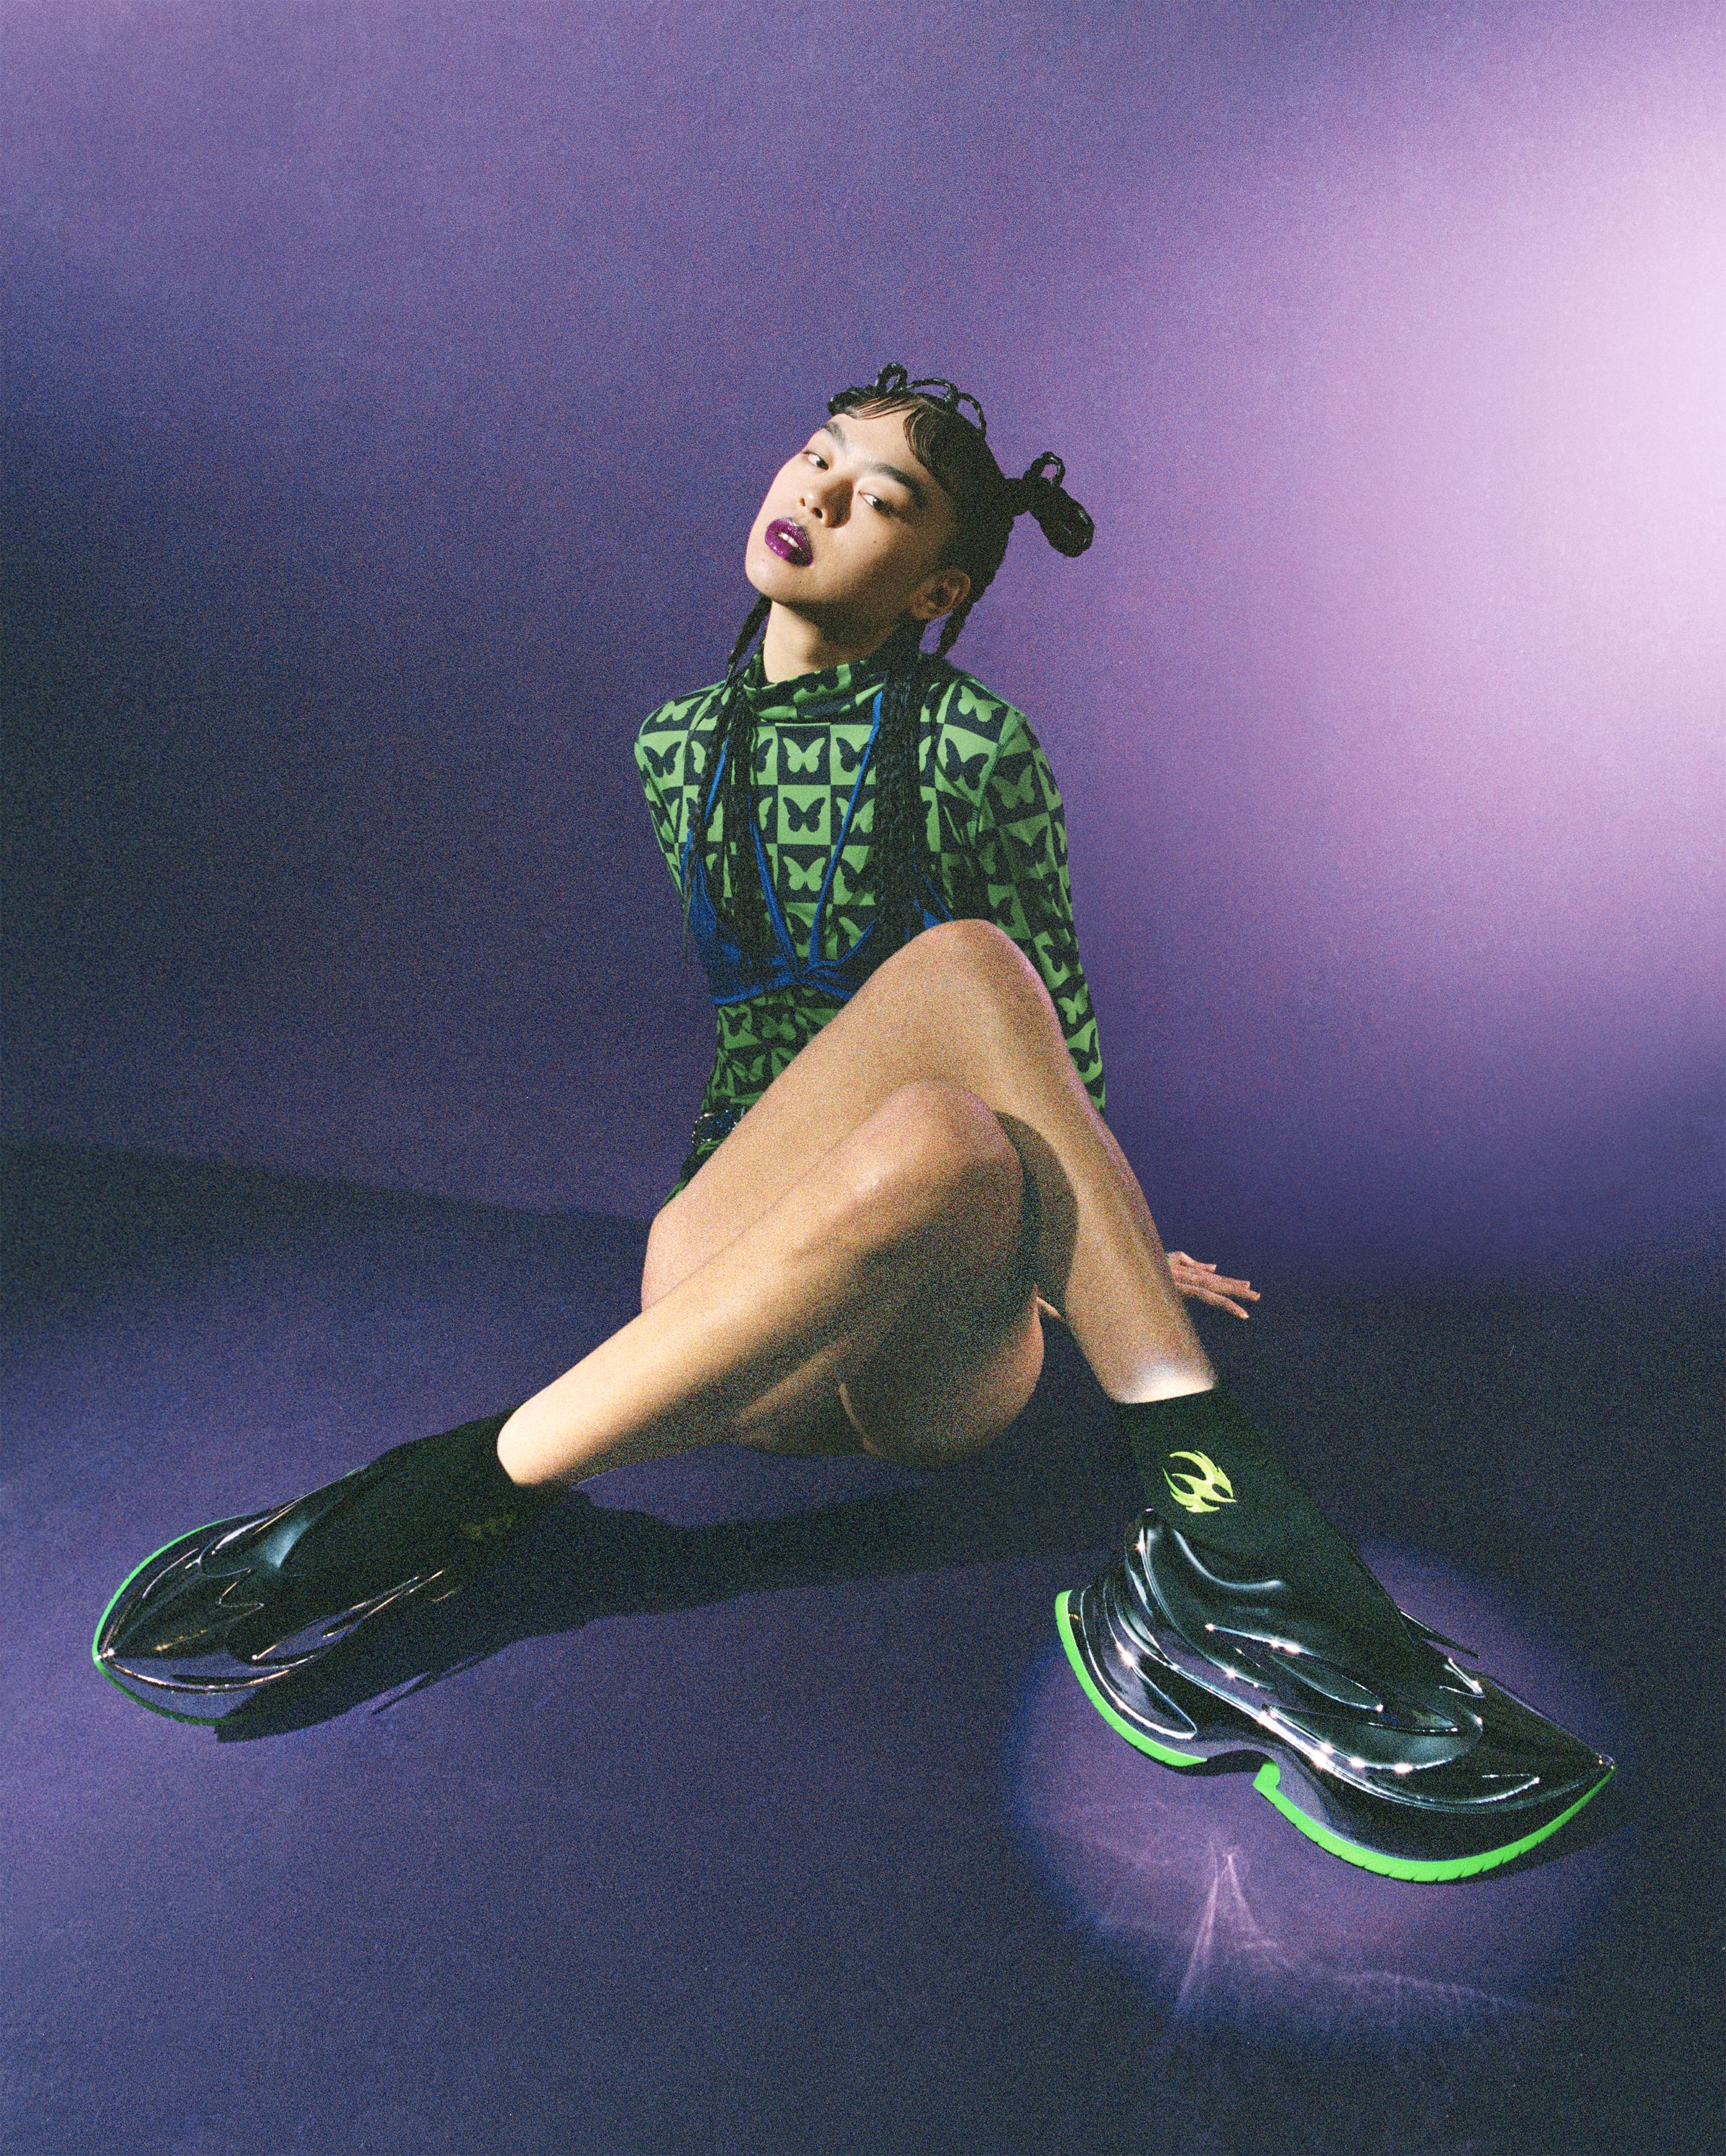 A person sitting on the floor, the background is purple and they are stretching out their leg to show a black and neon green trainer